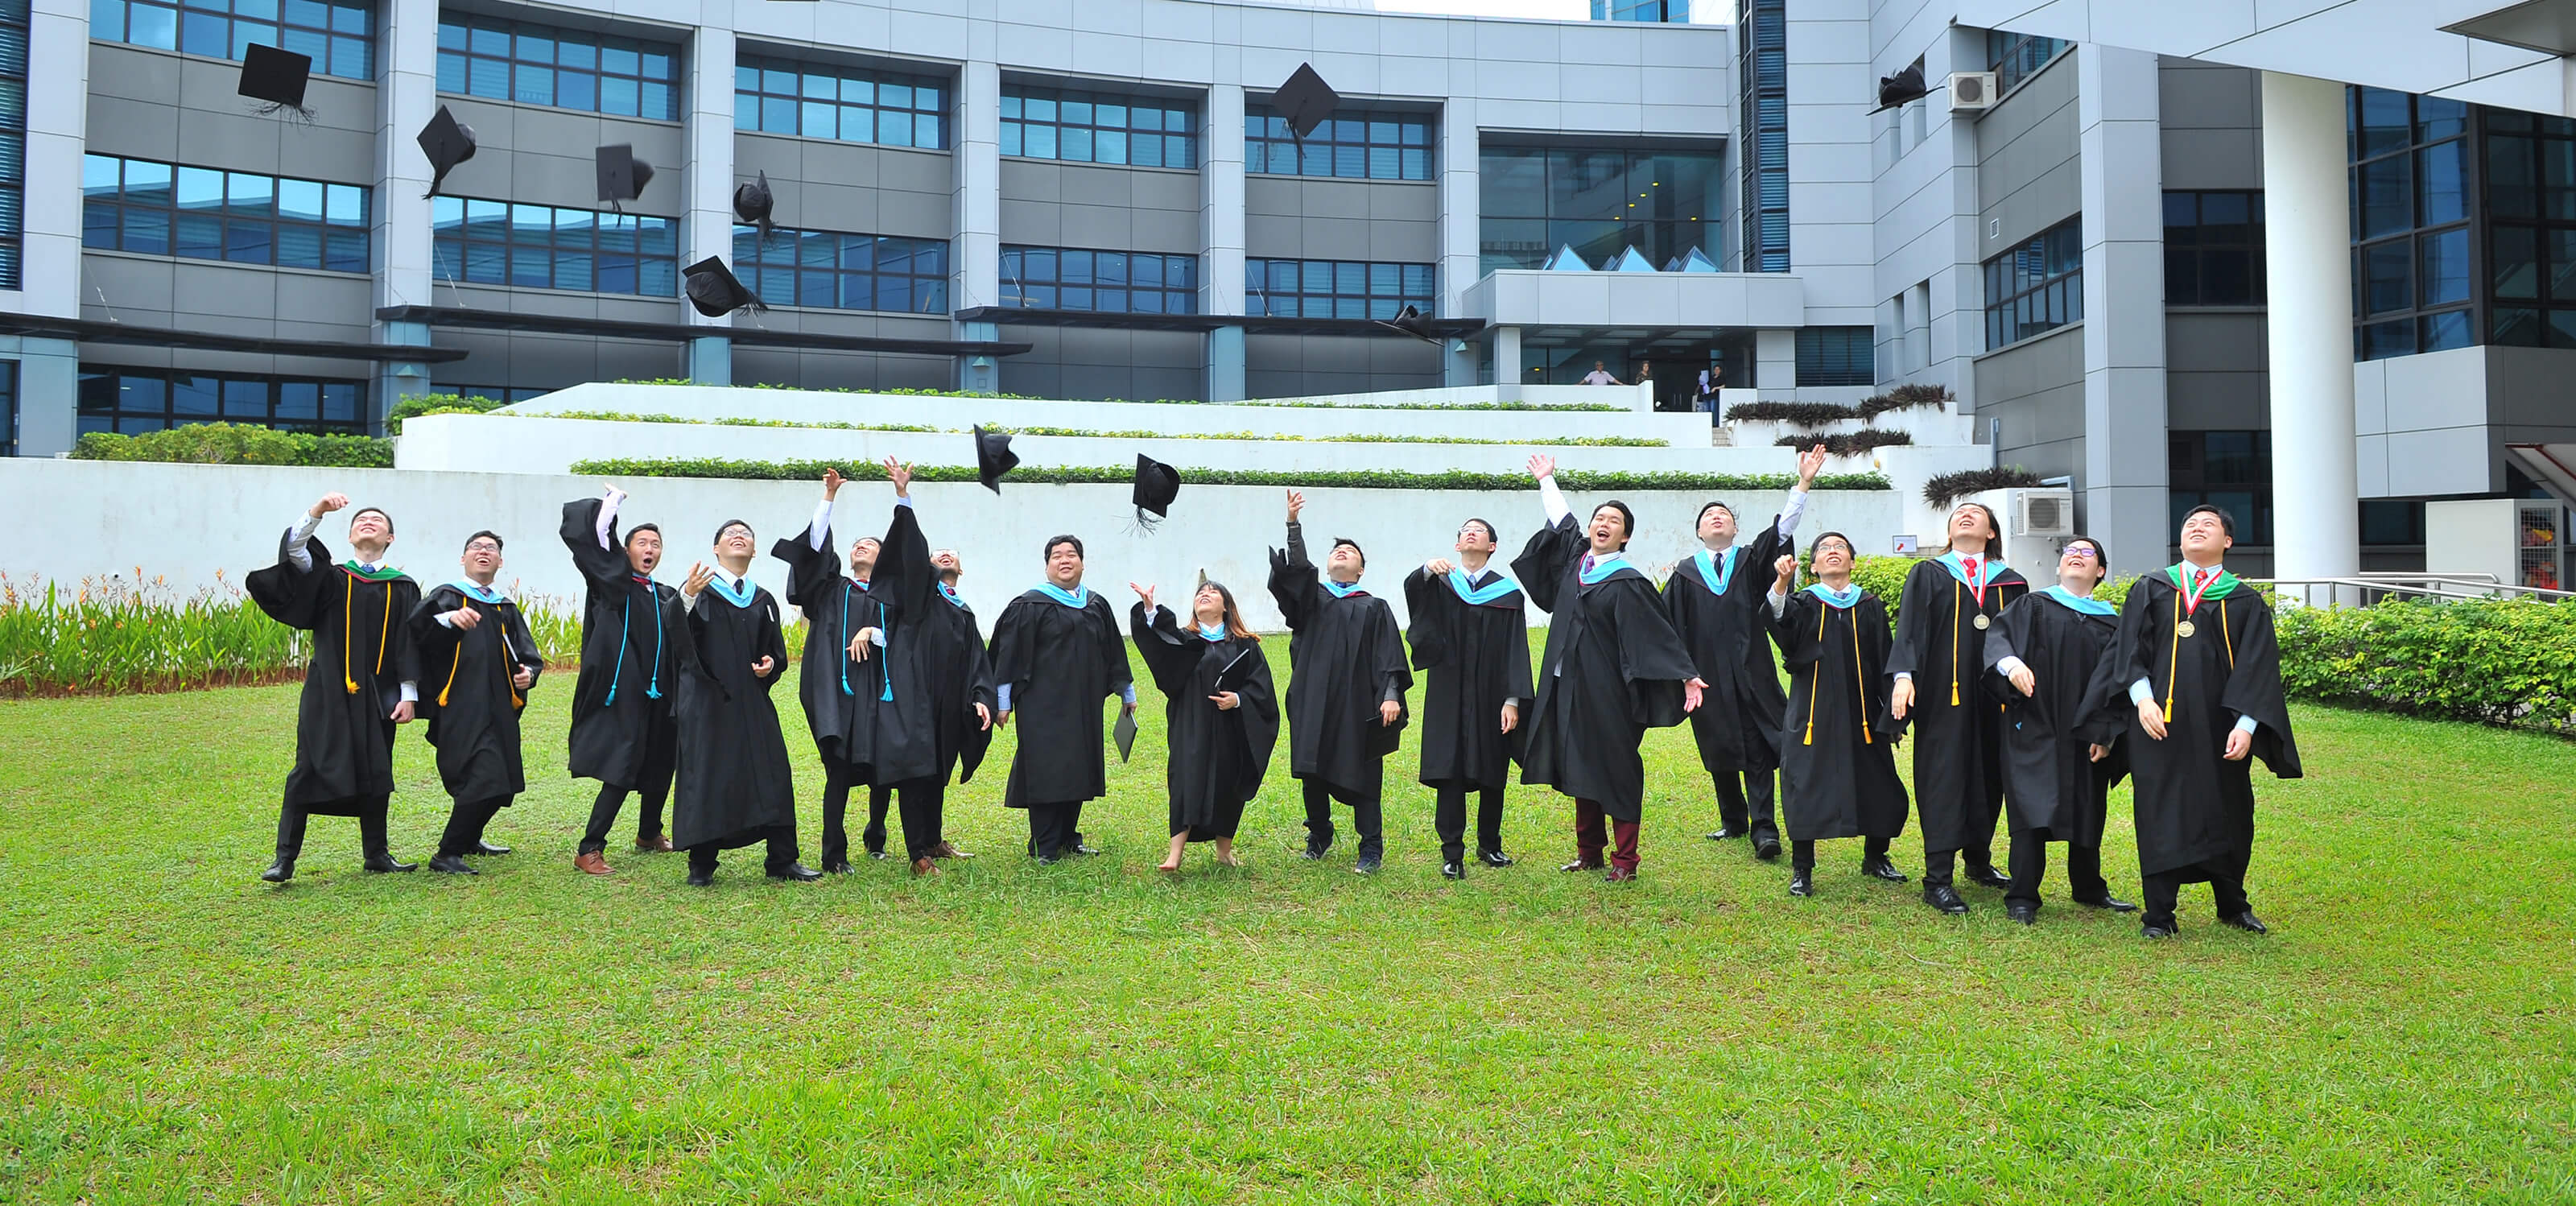 Several lined-up graduates throw their graduation caps into the air while standing outside on the grass.